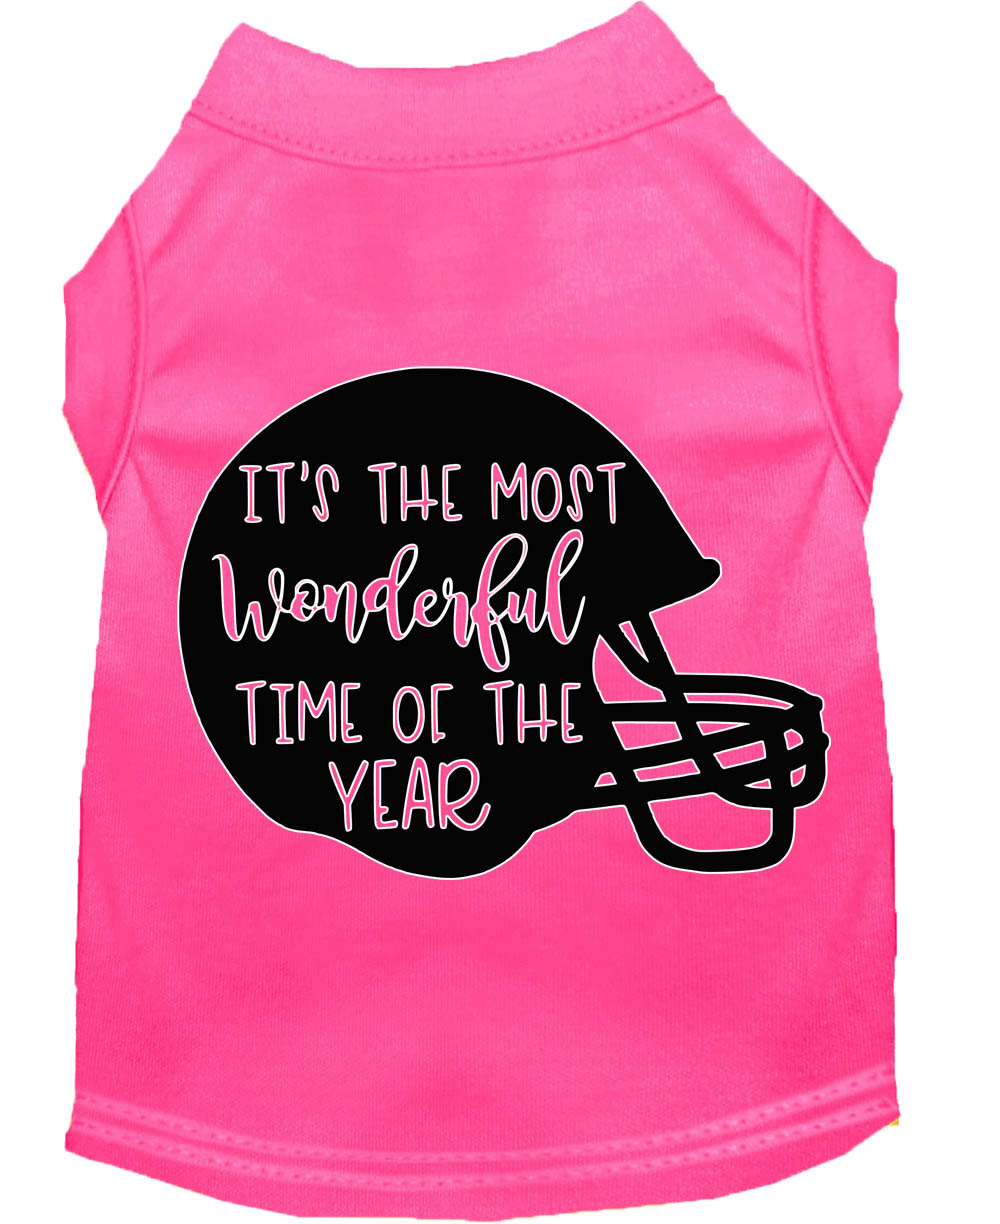 Most Wonderful Time of the Year (Football) Screen Print Dog Shirt Bright Pink XXL